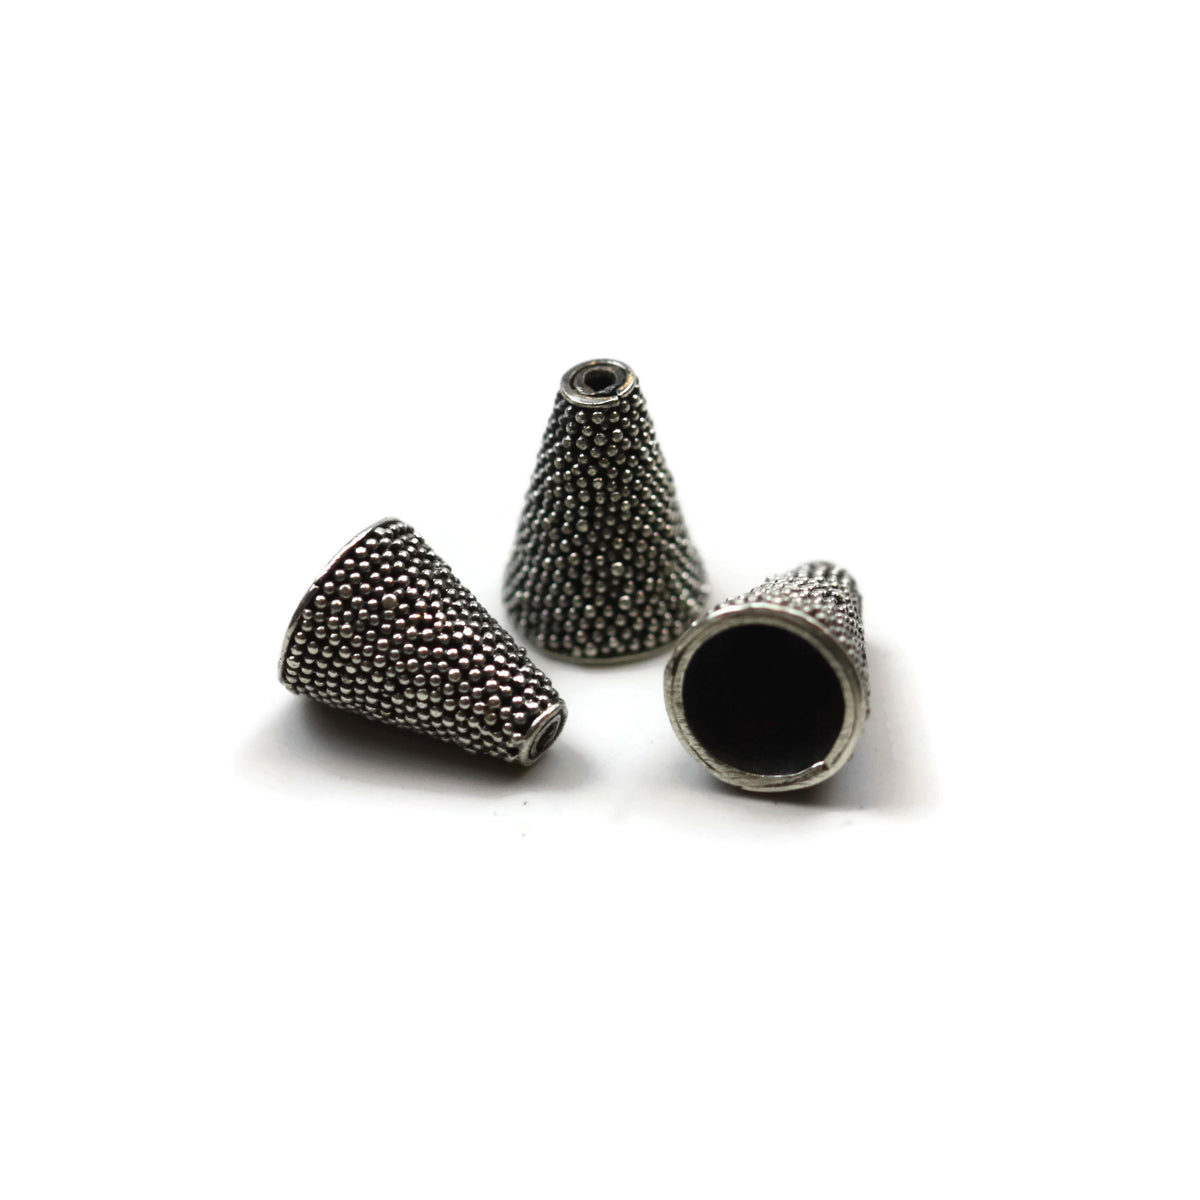 Bali Bead Sterling Silver Bead Cone 13x10 mm